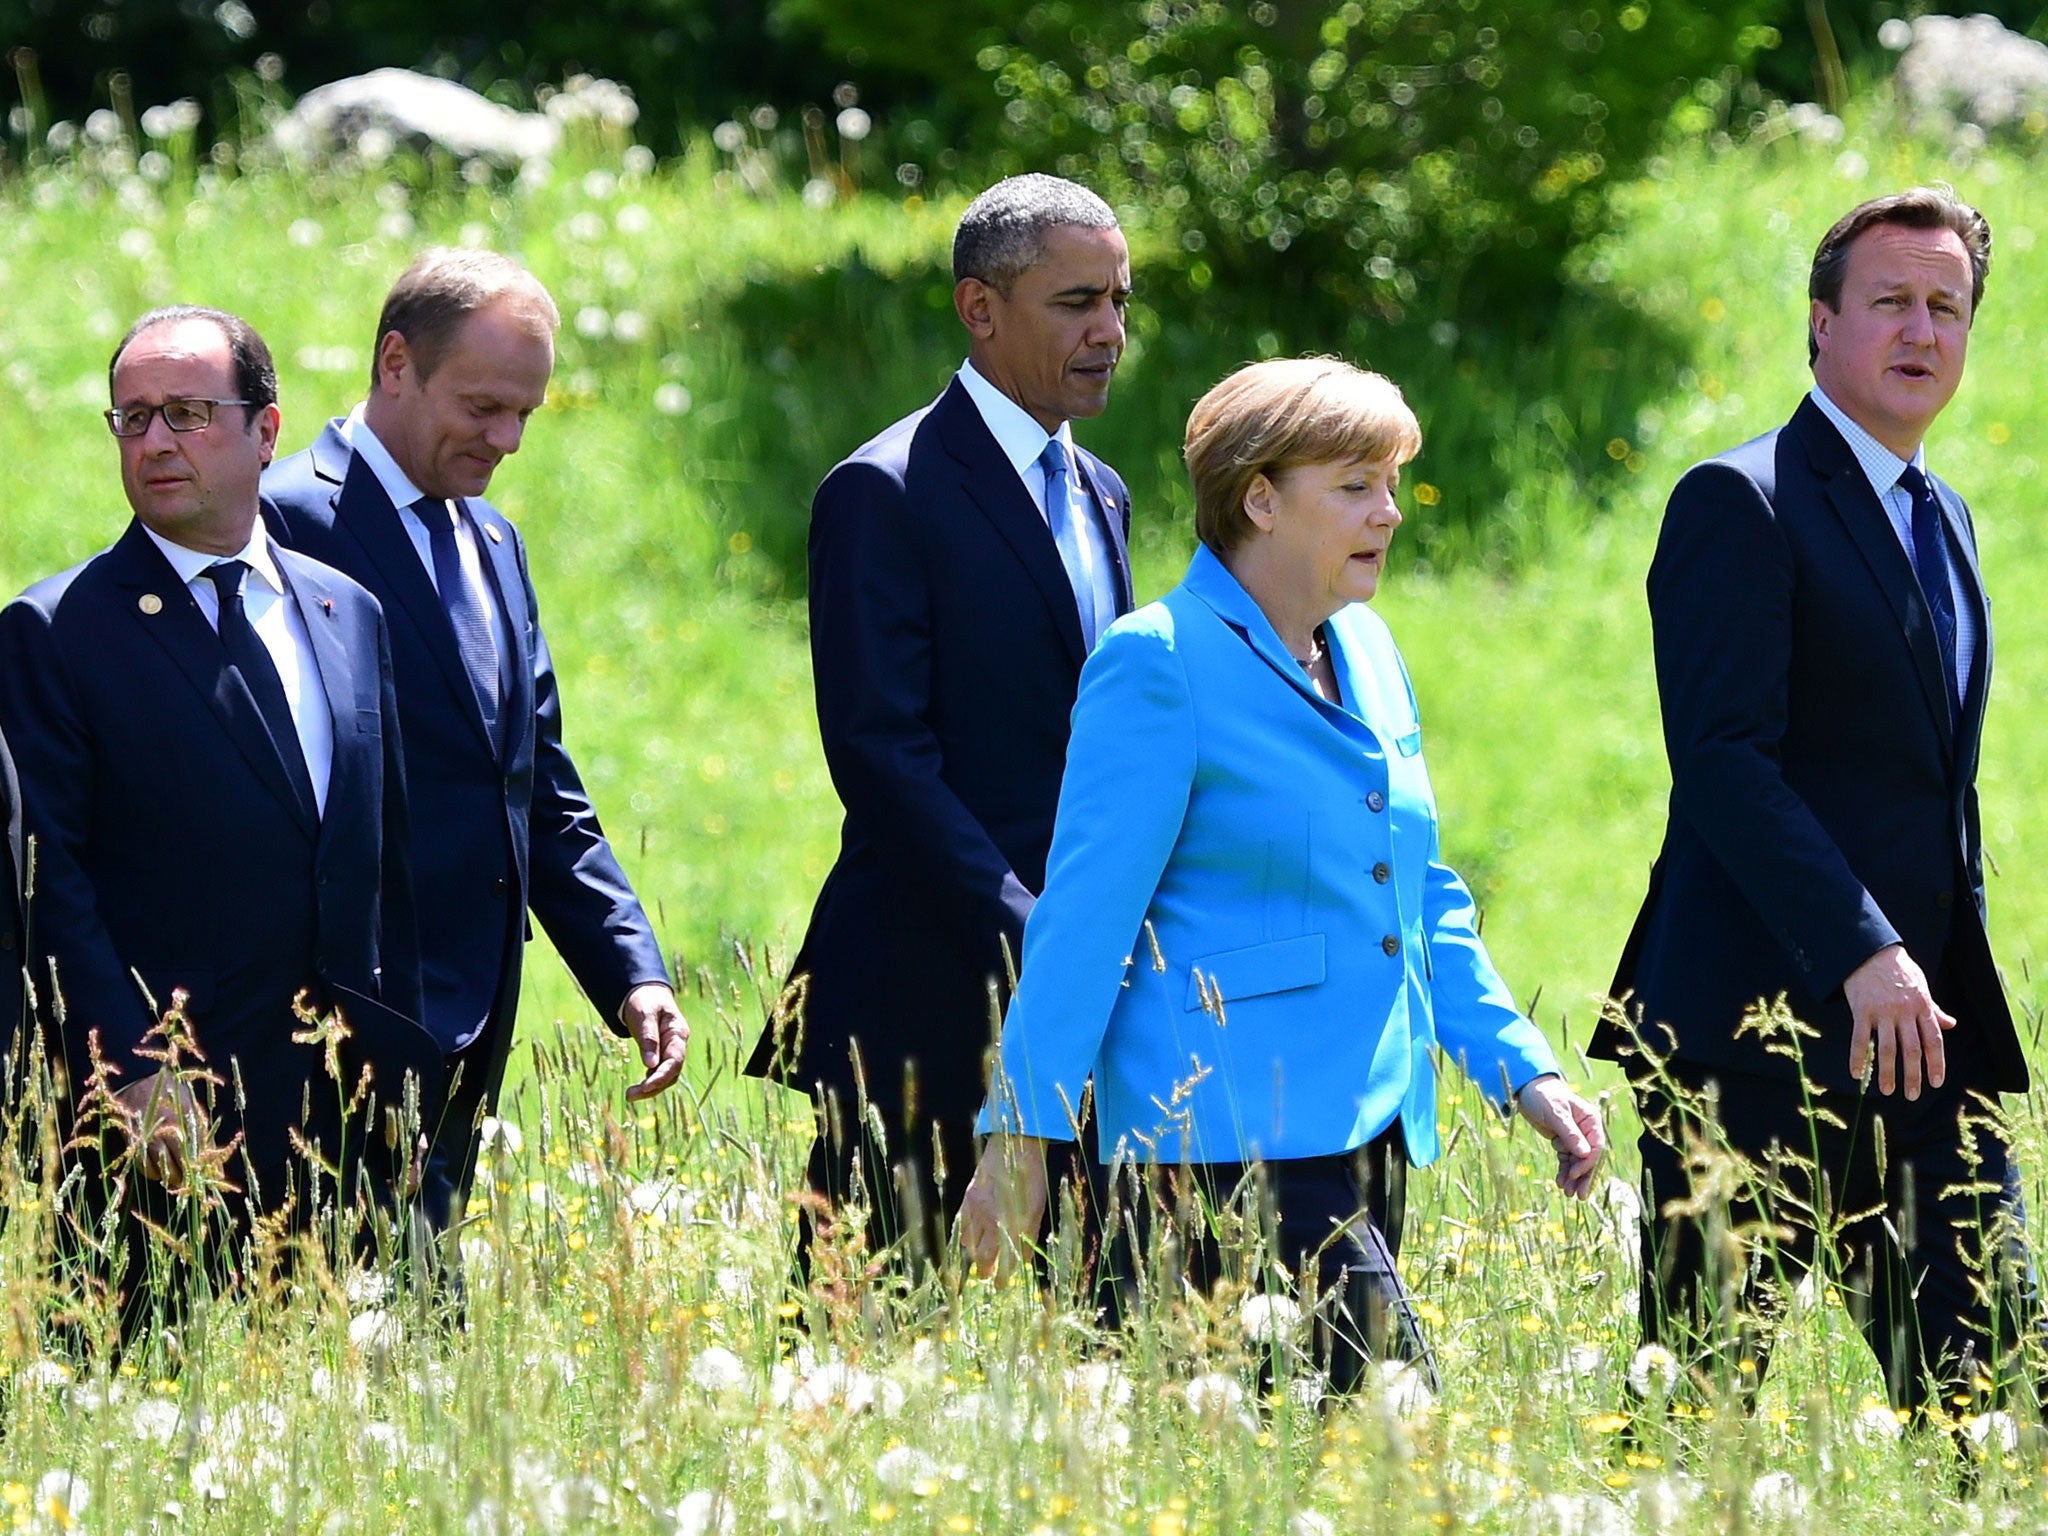 From left to right, British Prime Minister David Cameron, US President Barack Obama, Germany's Chancellor Angela Merkel, President of the European Council Donald Tusk, French President Francois Hollande on their way to their first working session at the E